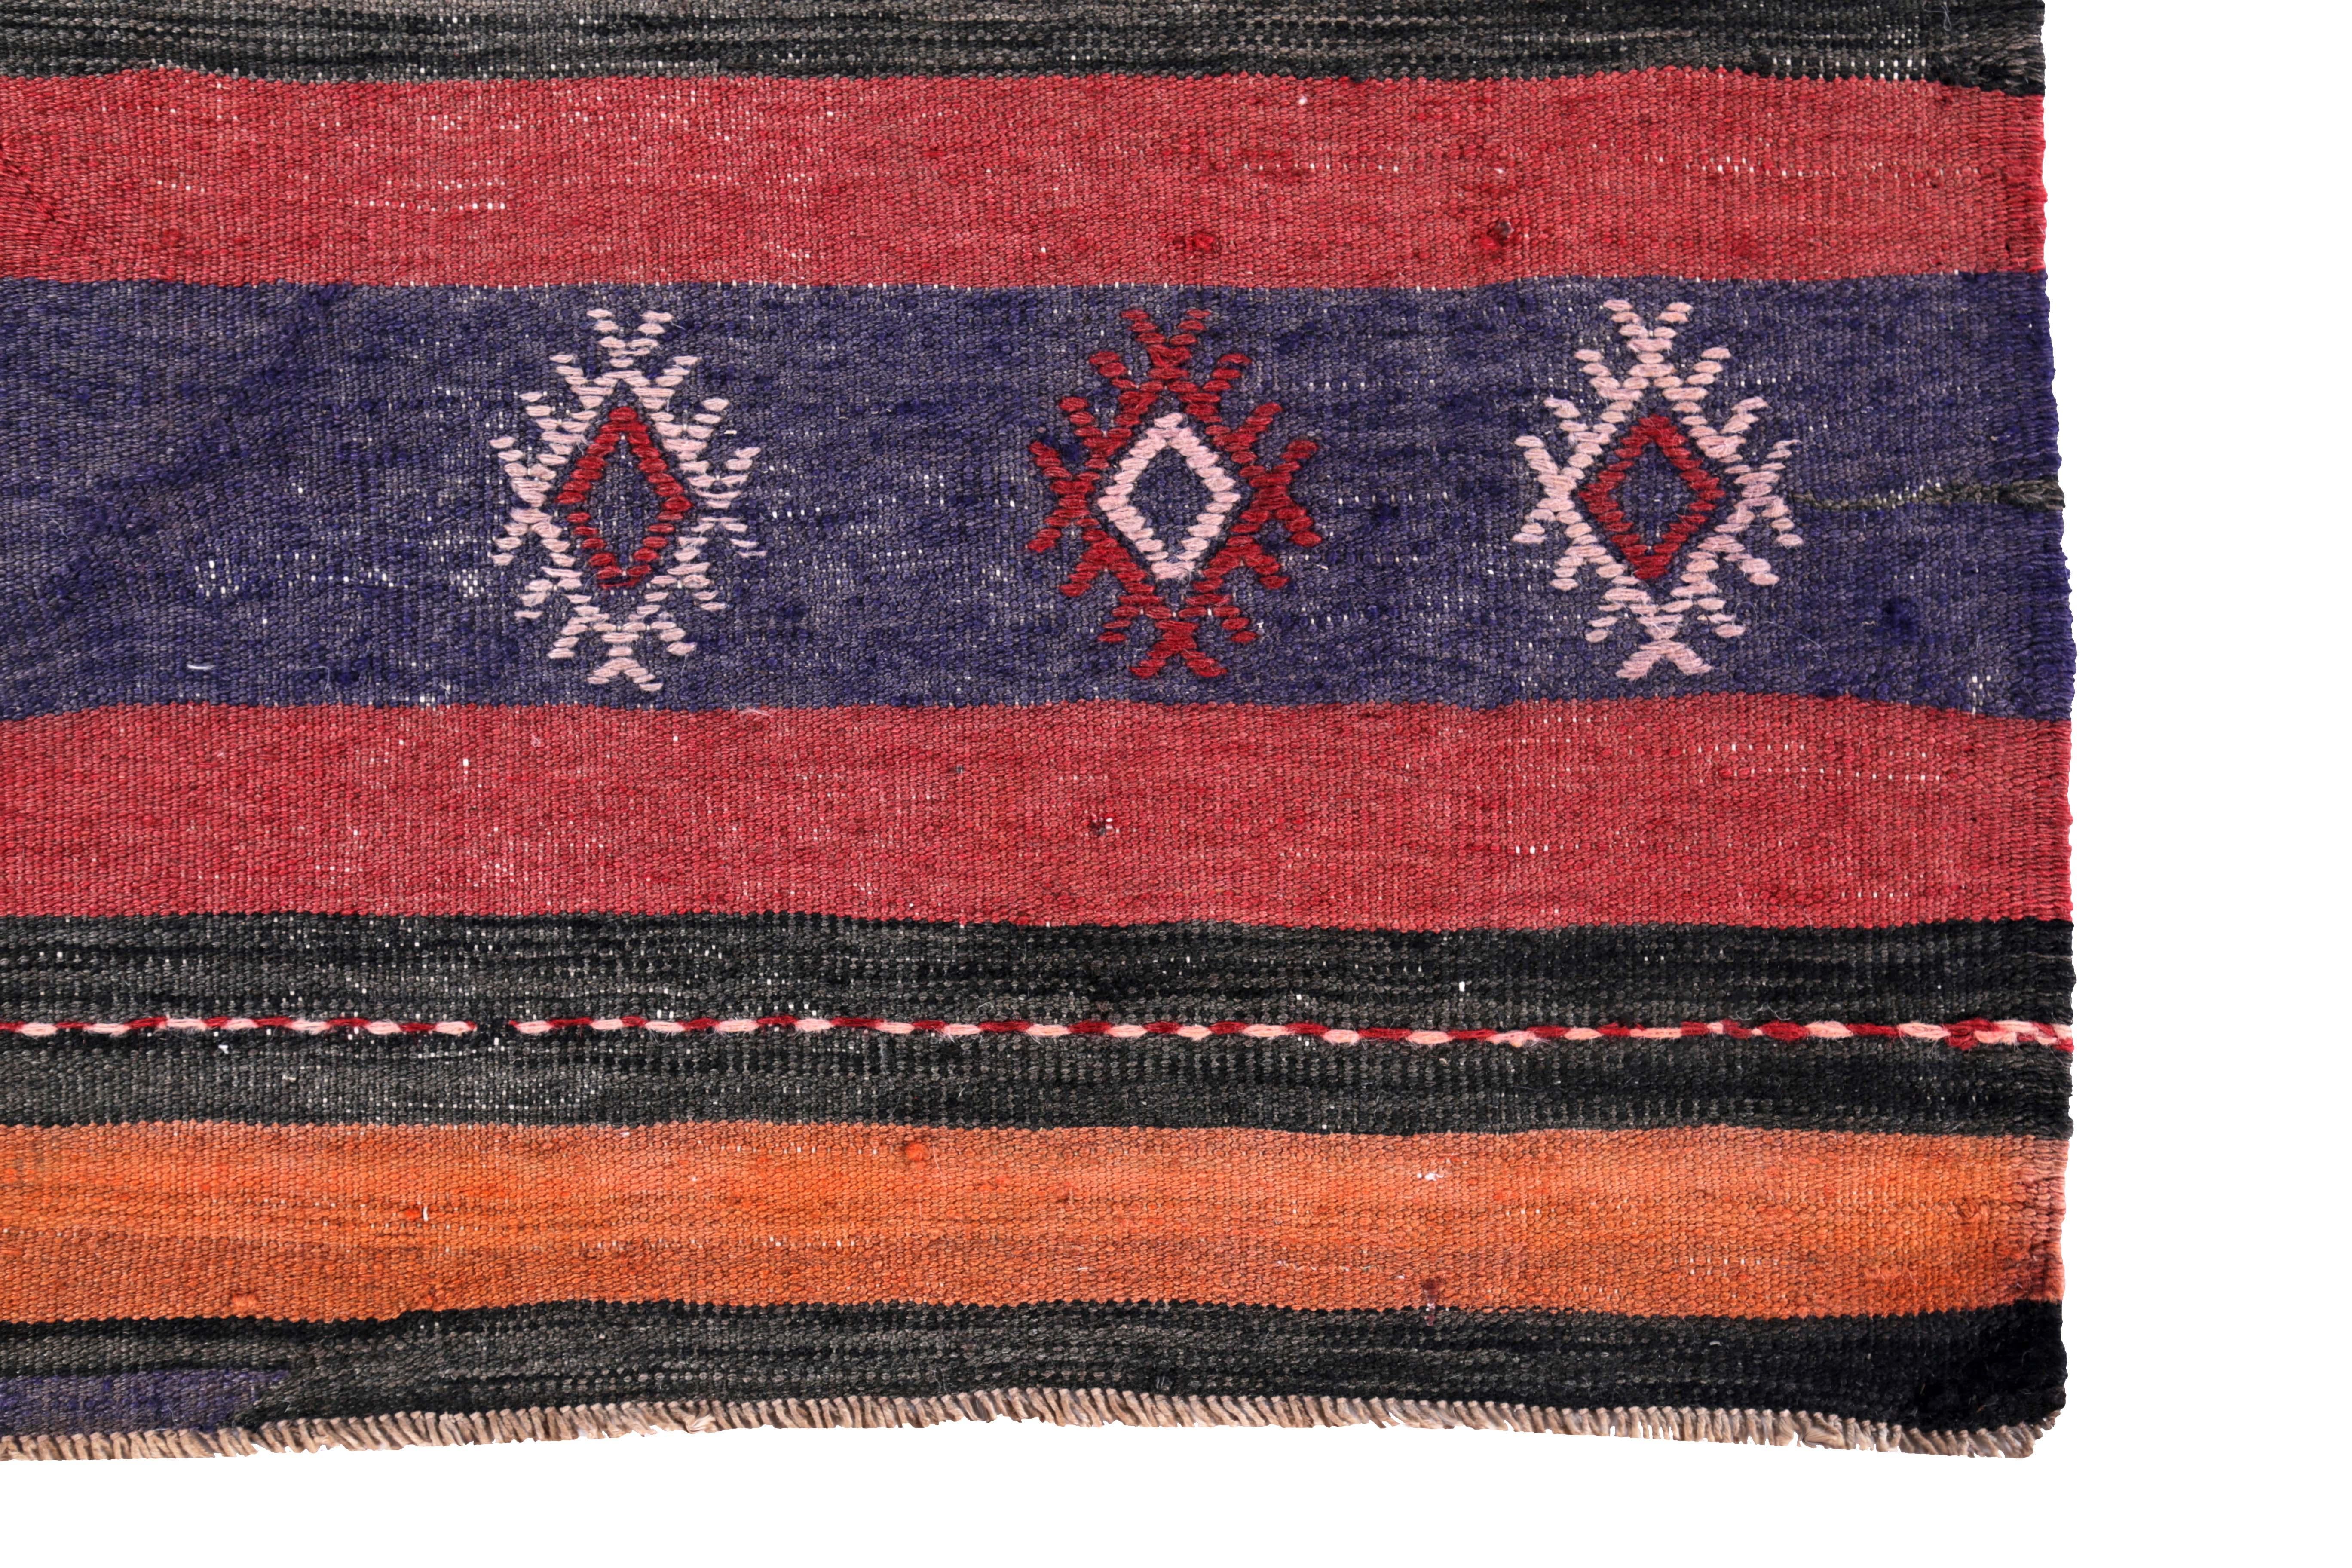 Turkish Kilim Runner Rug with Orange, Blue, Red and Black Tribal Diamonds In New Condition For Sale In Dallas, TX